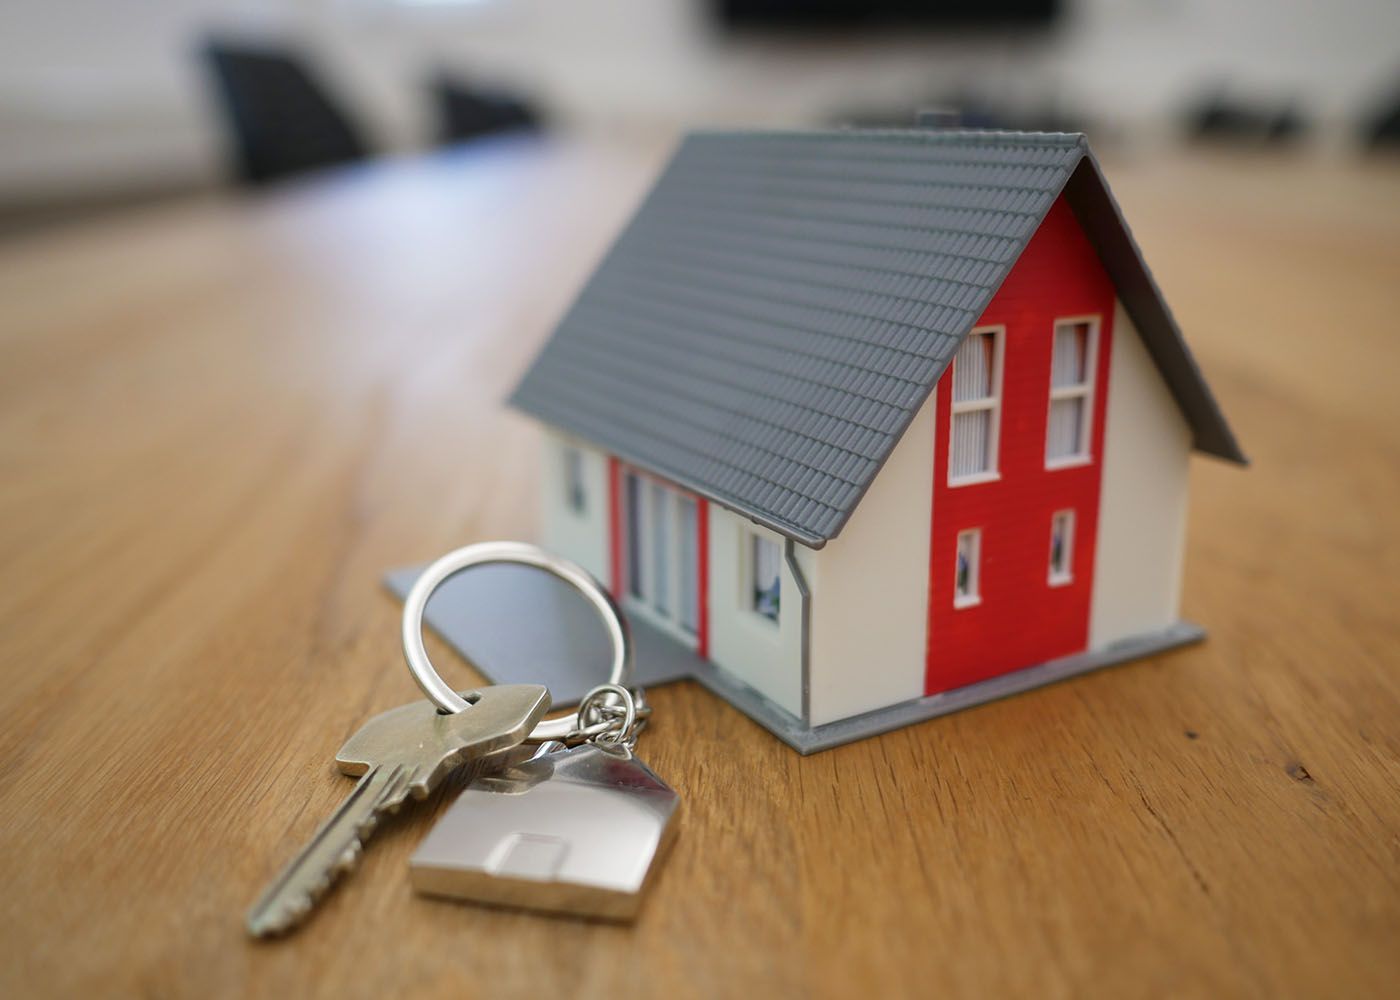 Key on a keychain and a small model home 